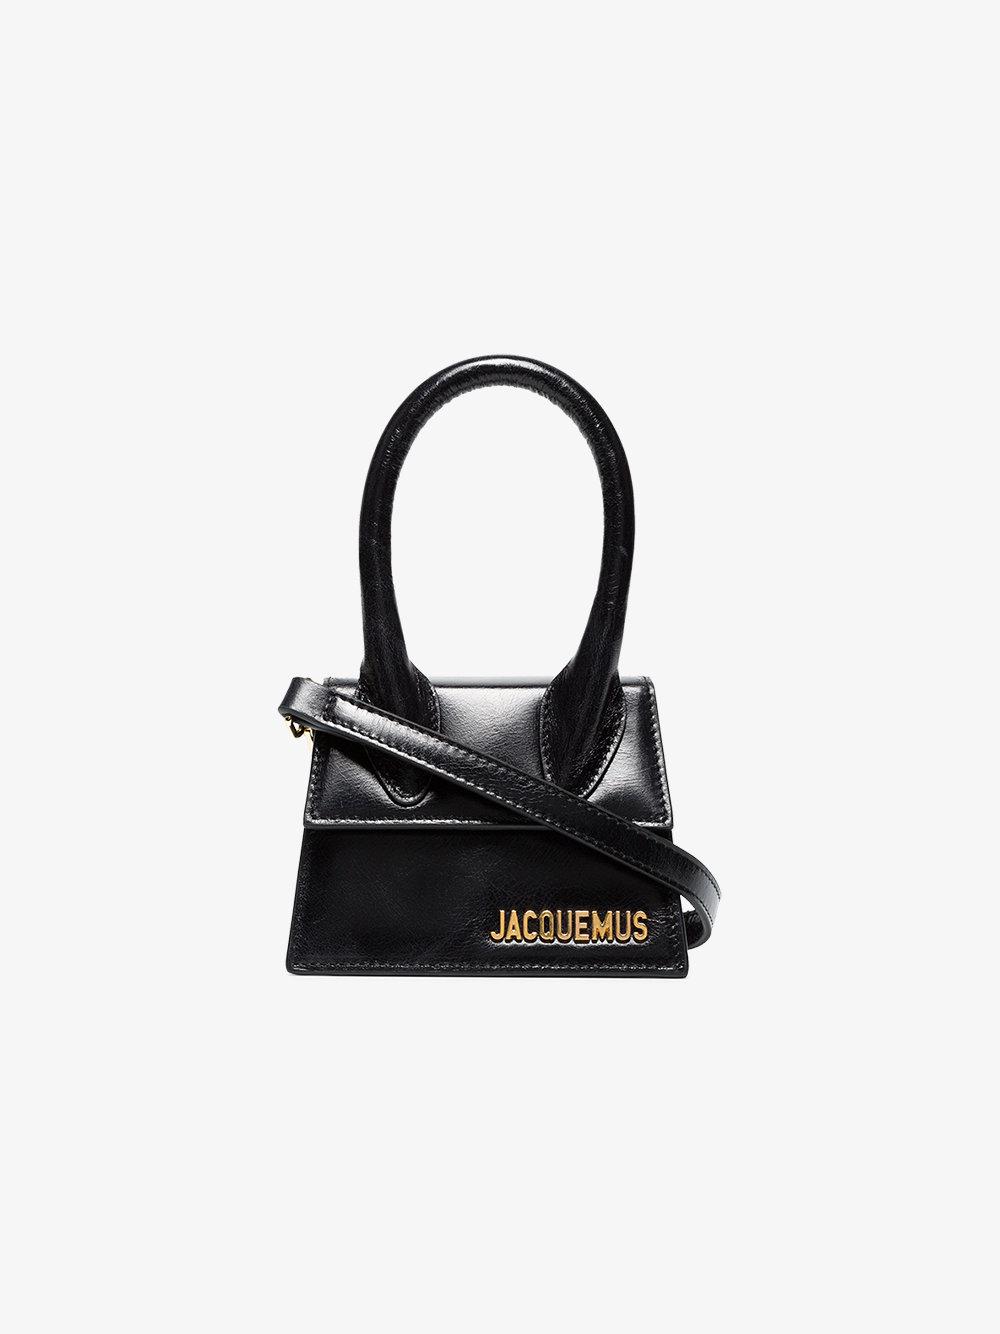 Jacquemus Leather Le Sac Chiquito in Black - Lyst